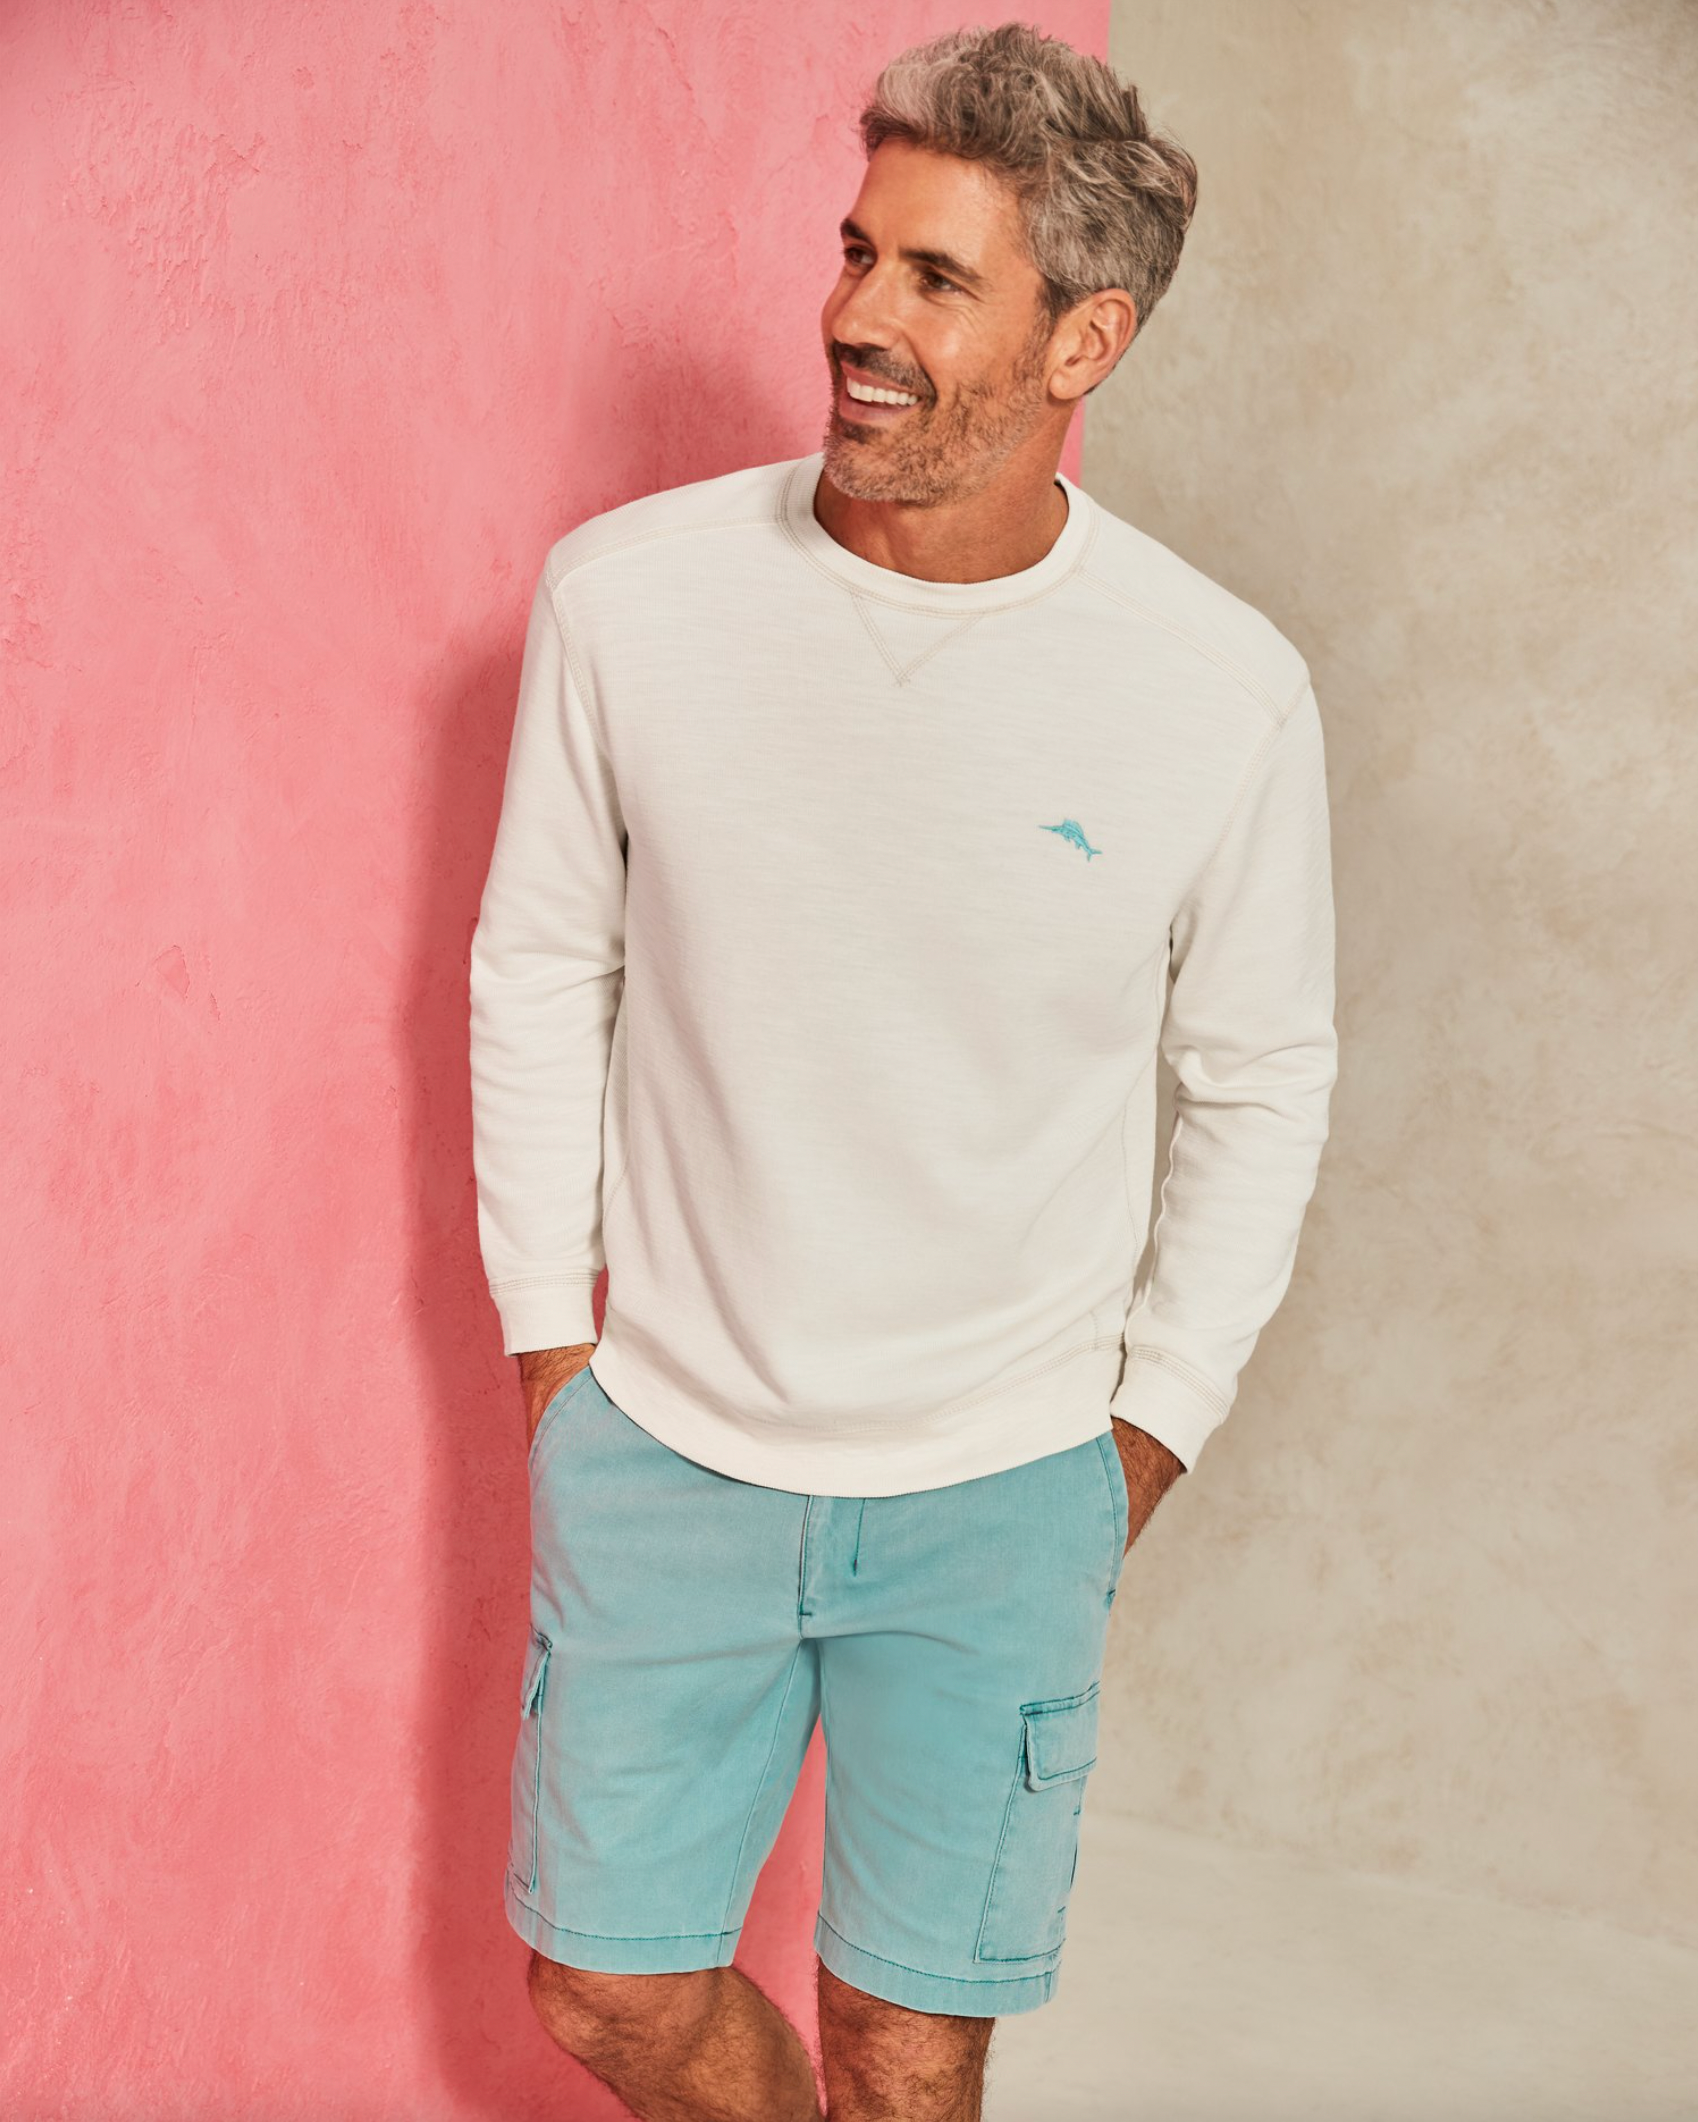 The ultra-sleek, ultra-comfortable cotton-blend sweatshirt of your dreams has arrived! Say hello to the Tobago Bay Crewneck: its first class style, comfort, and breadth of colours makes it the ultimate layering piece that can go just about anywhere.